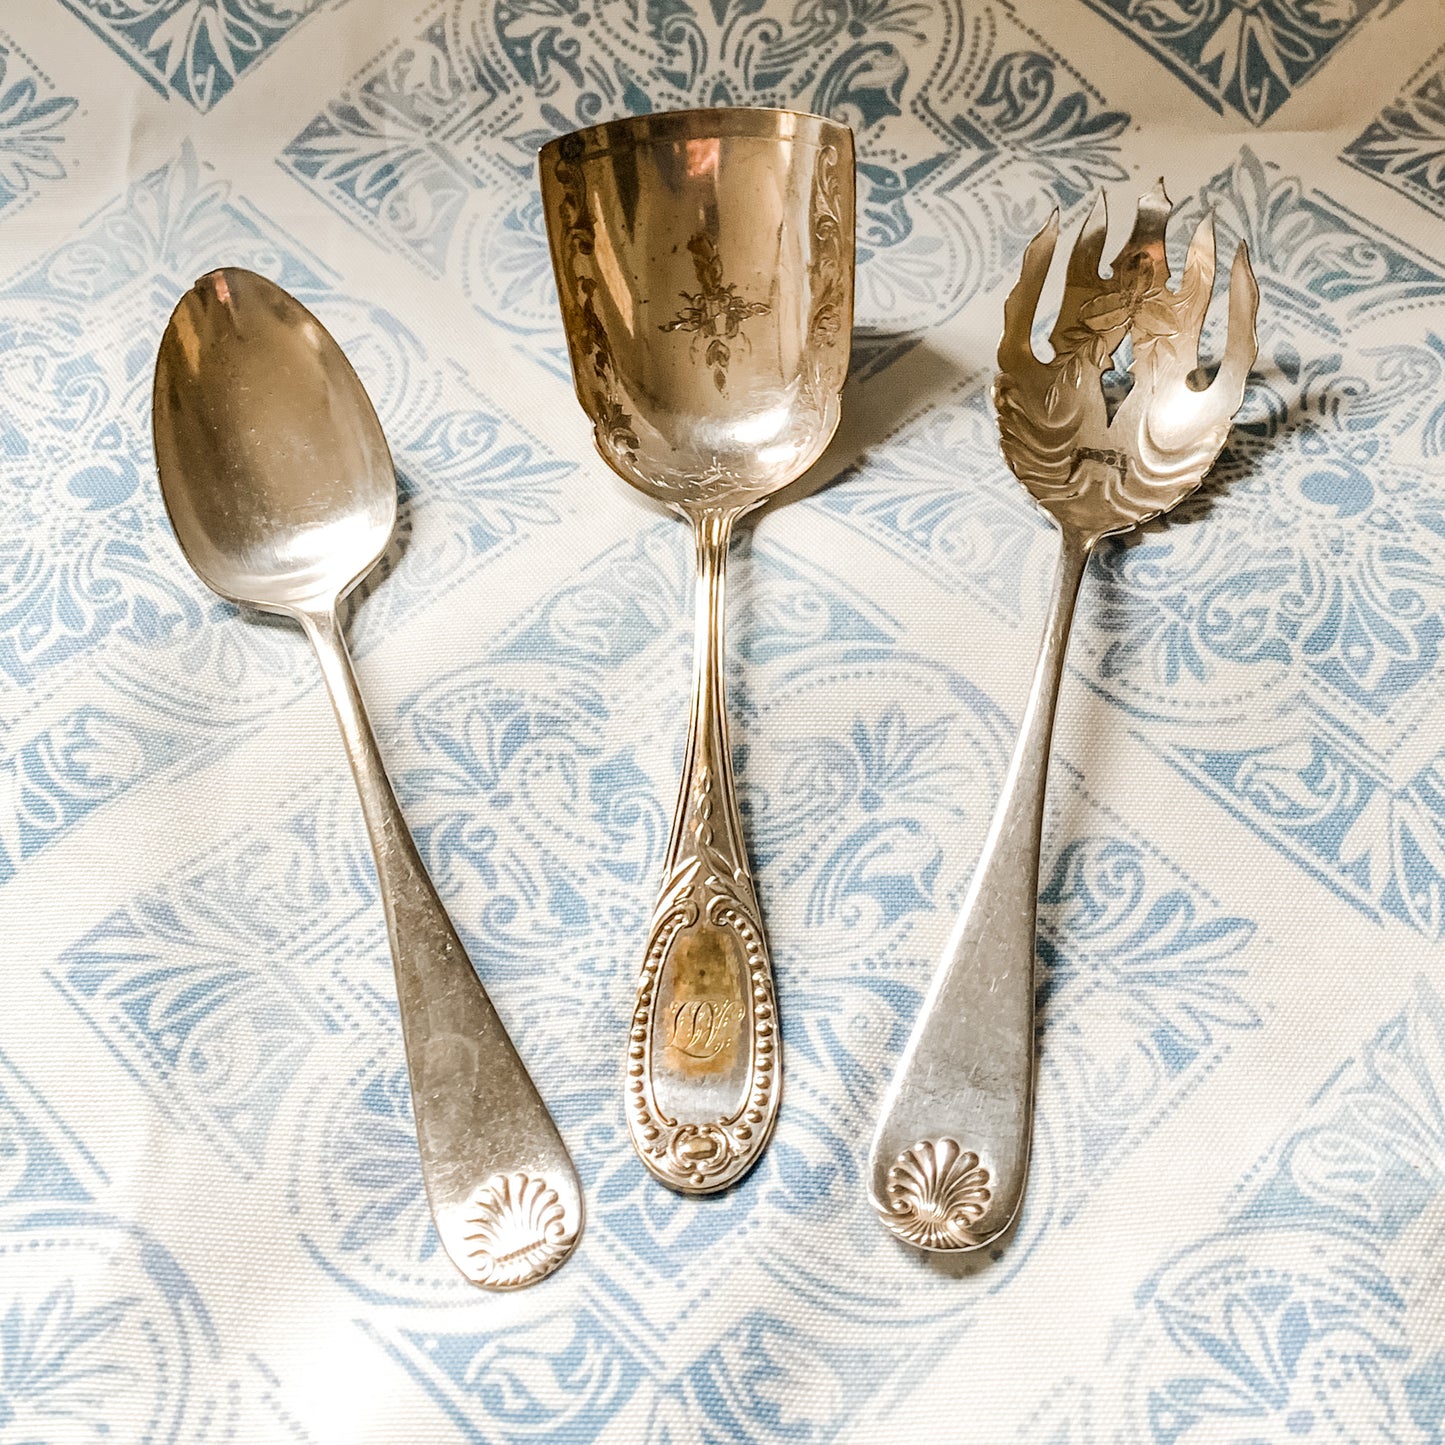 Three Fabulous Antique Silver Serving Pieces